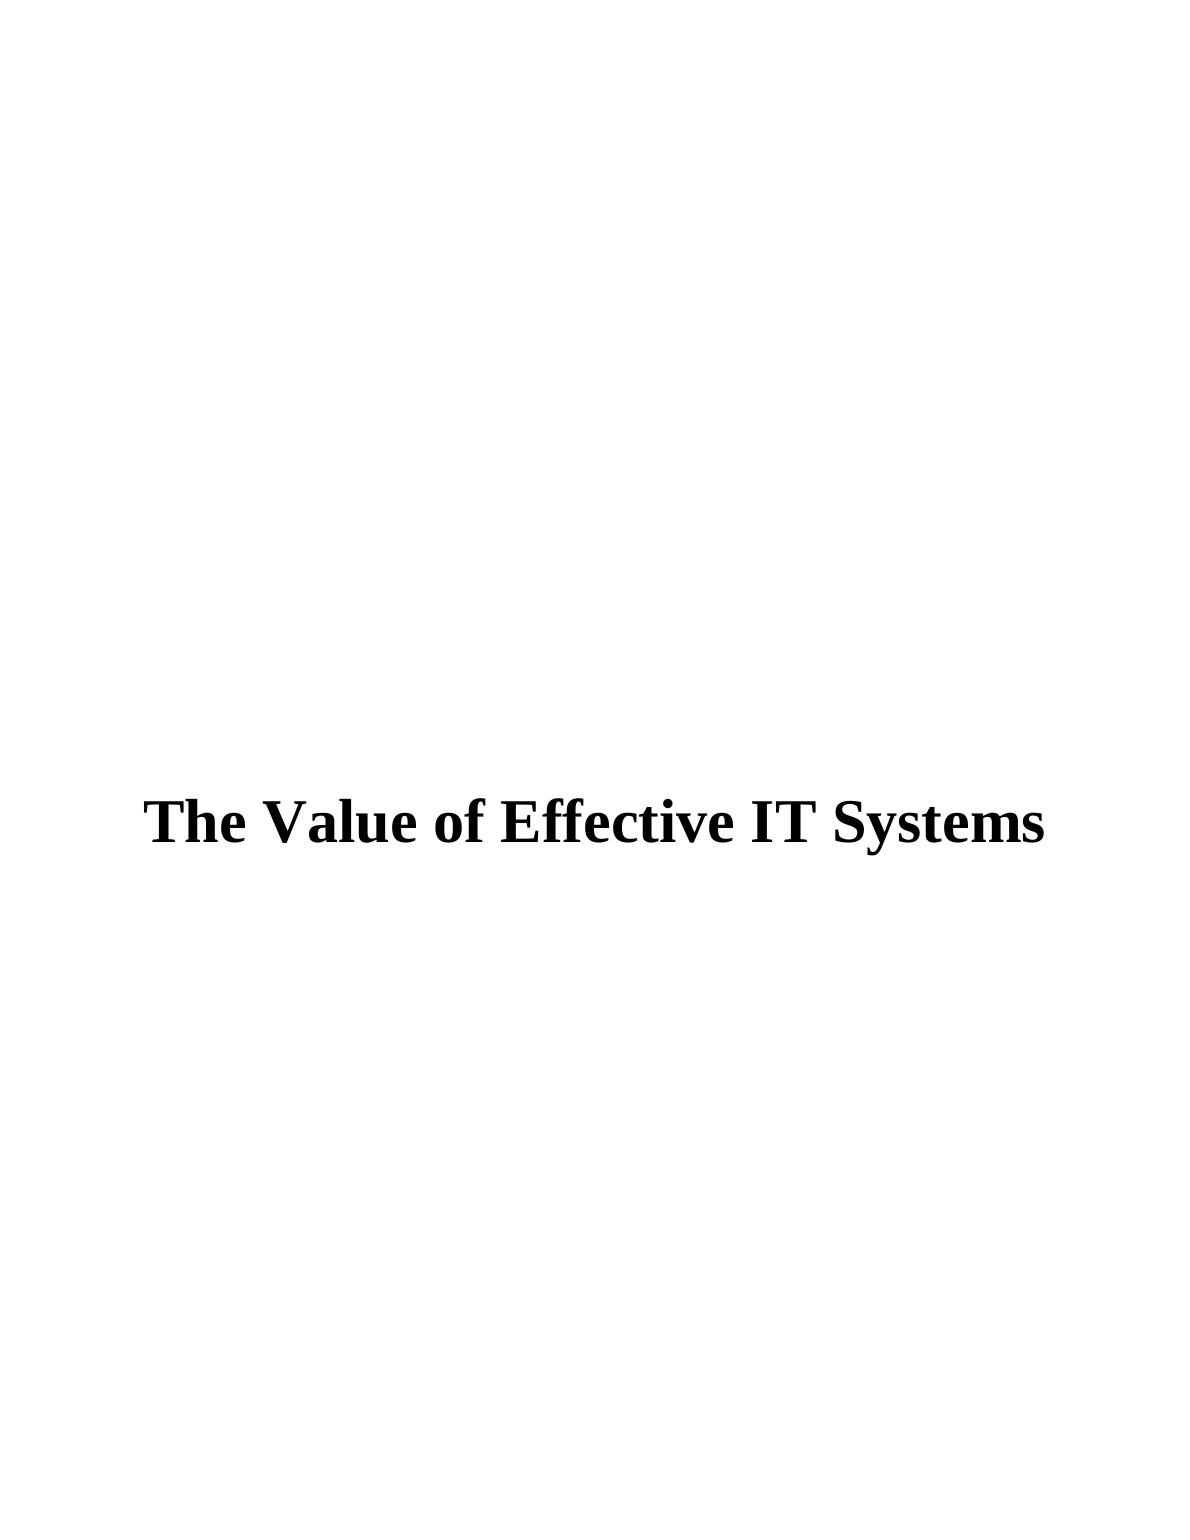 The Value of Effective IT Systems (Doc)_1